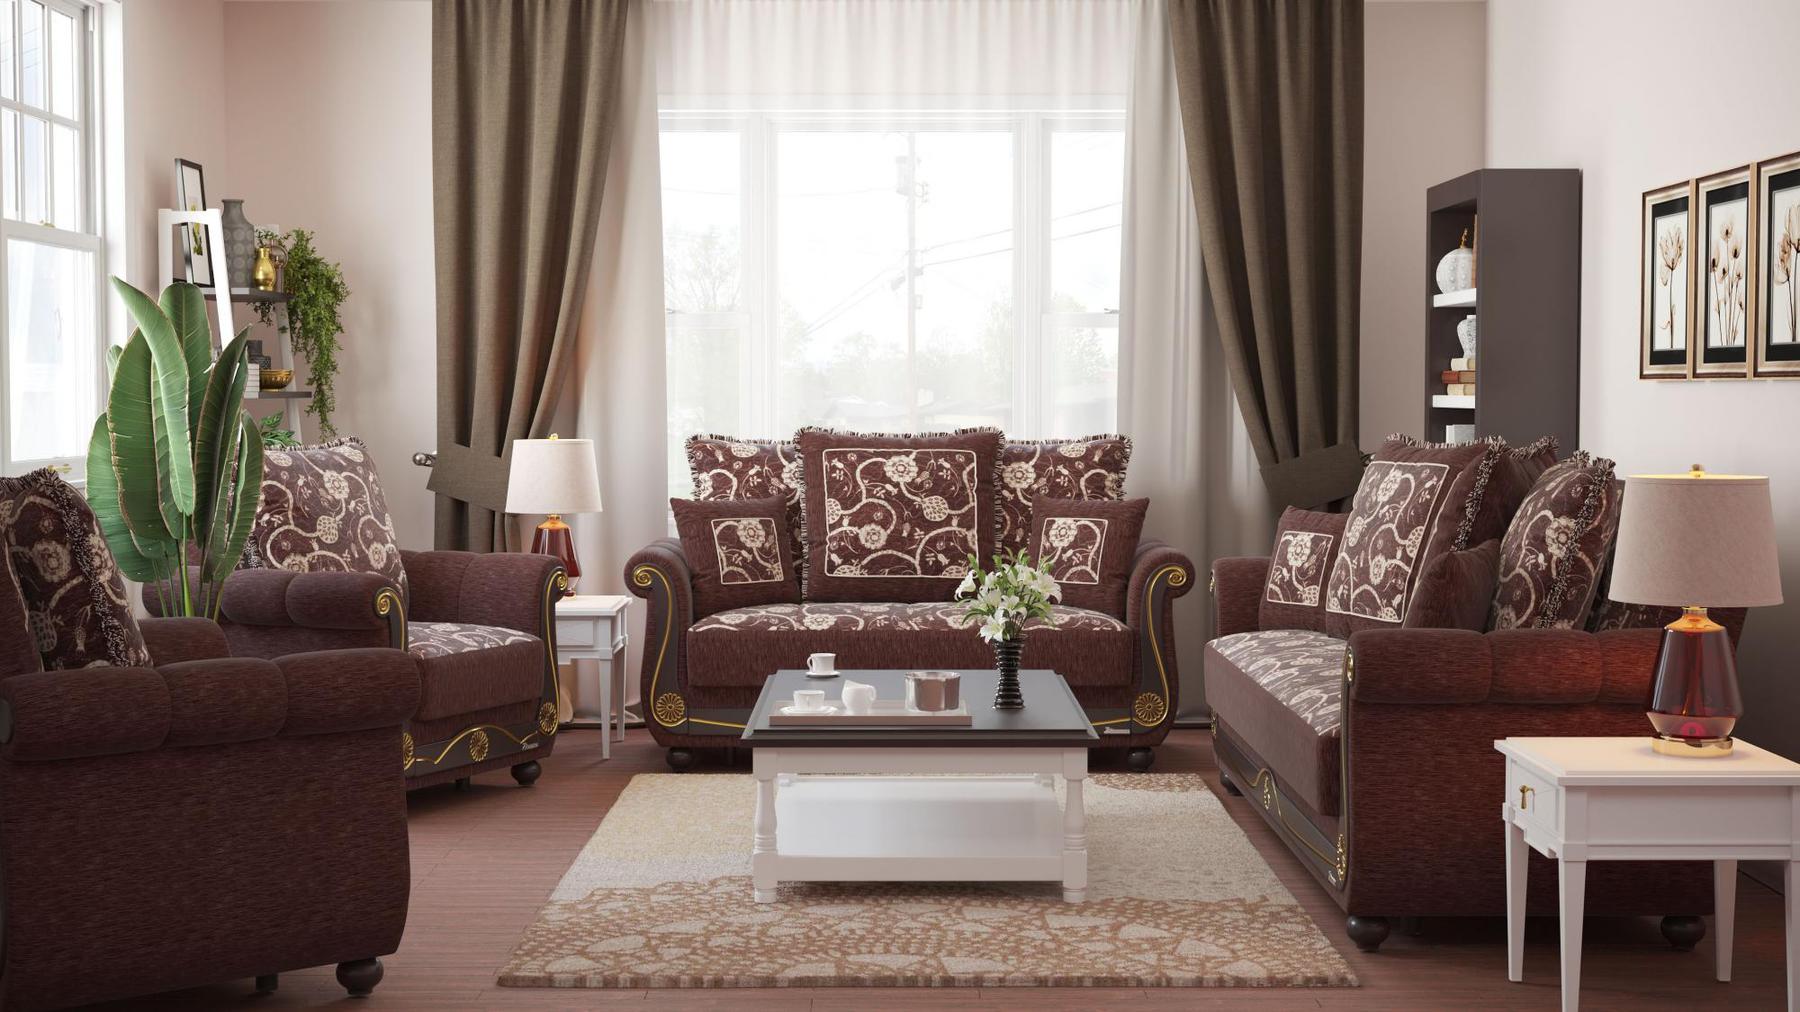 Lawson design, Royal Brown , Chenille upholstered convertible Armchair with underseat storage from Victoria by Ottomanson in living room lifestyle setting with the matching furniture set. This Armchair measures 41 inches width by 40 inches depth by 40 inches height.